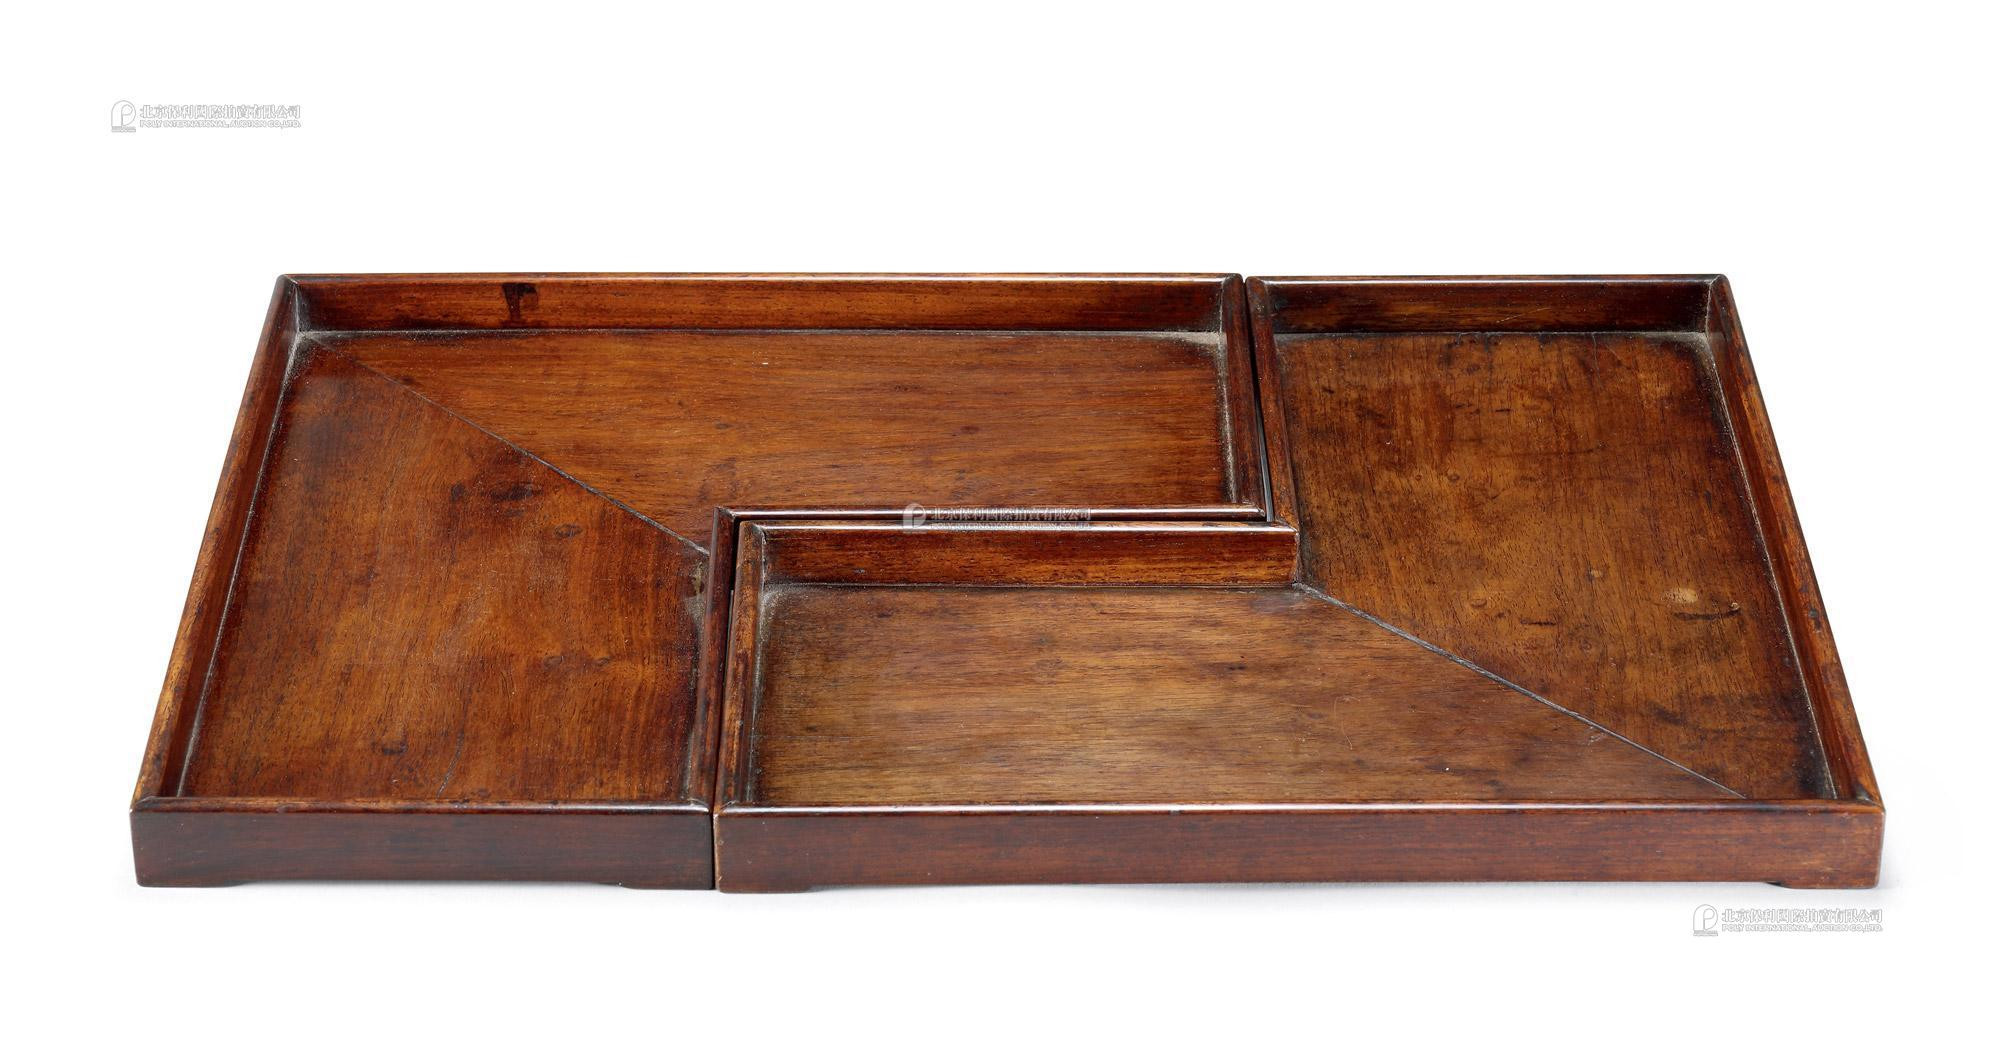 A Pair of Rosewood Ruler-Shaped Trays